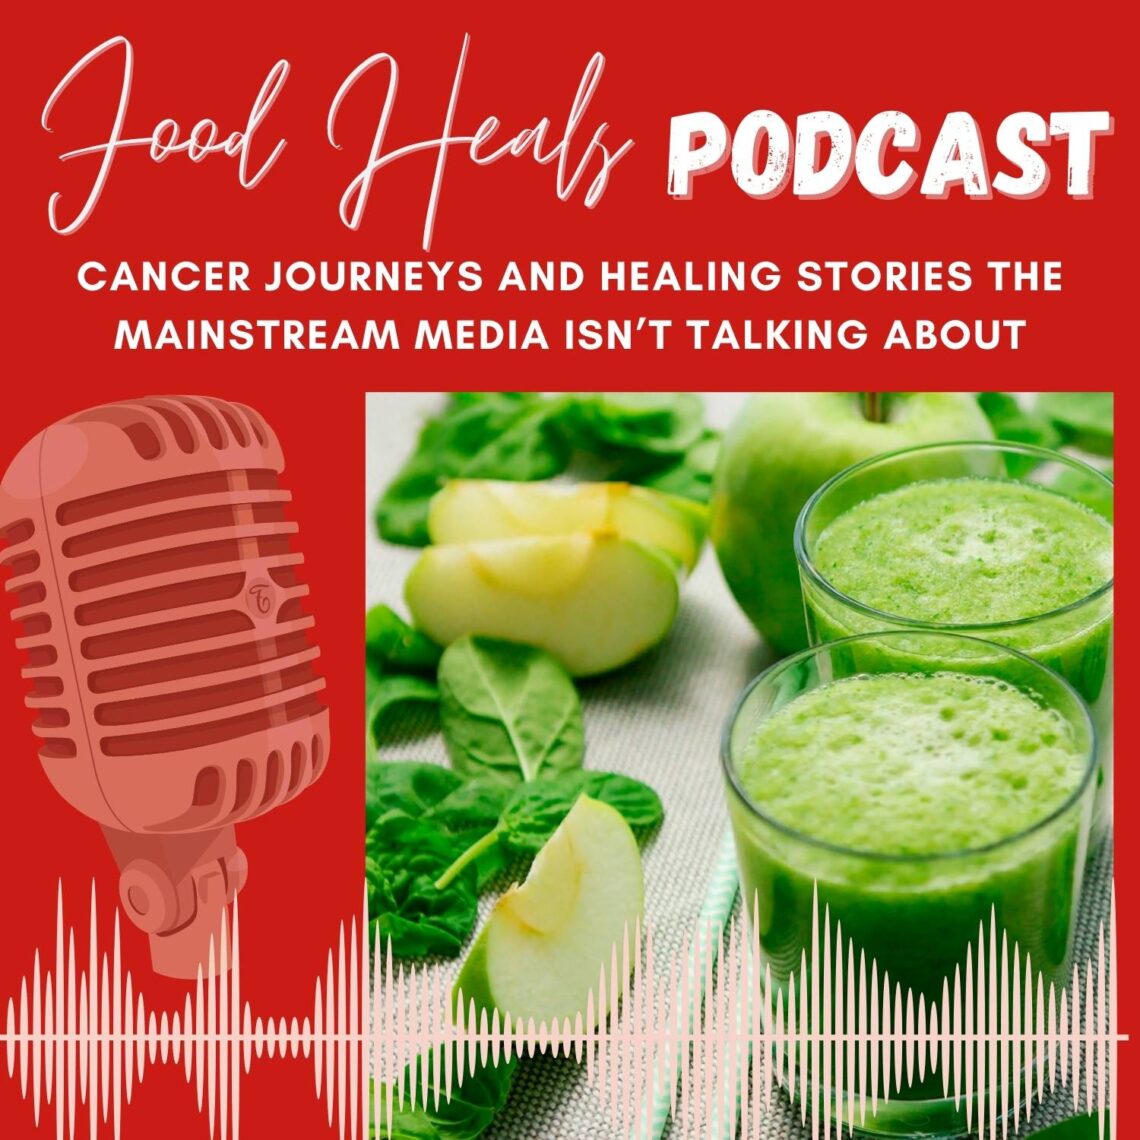 Cancer Healing Journeys on the Food Heals Podcast